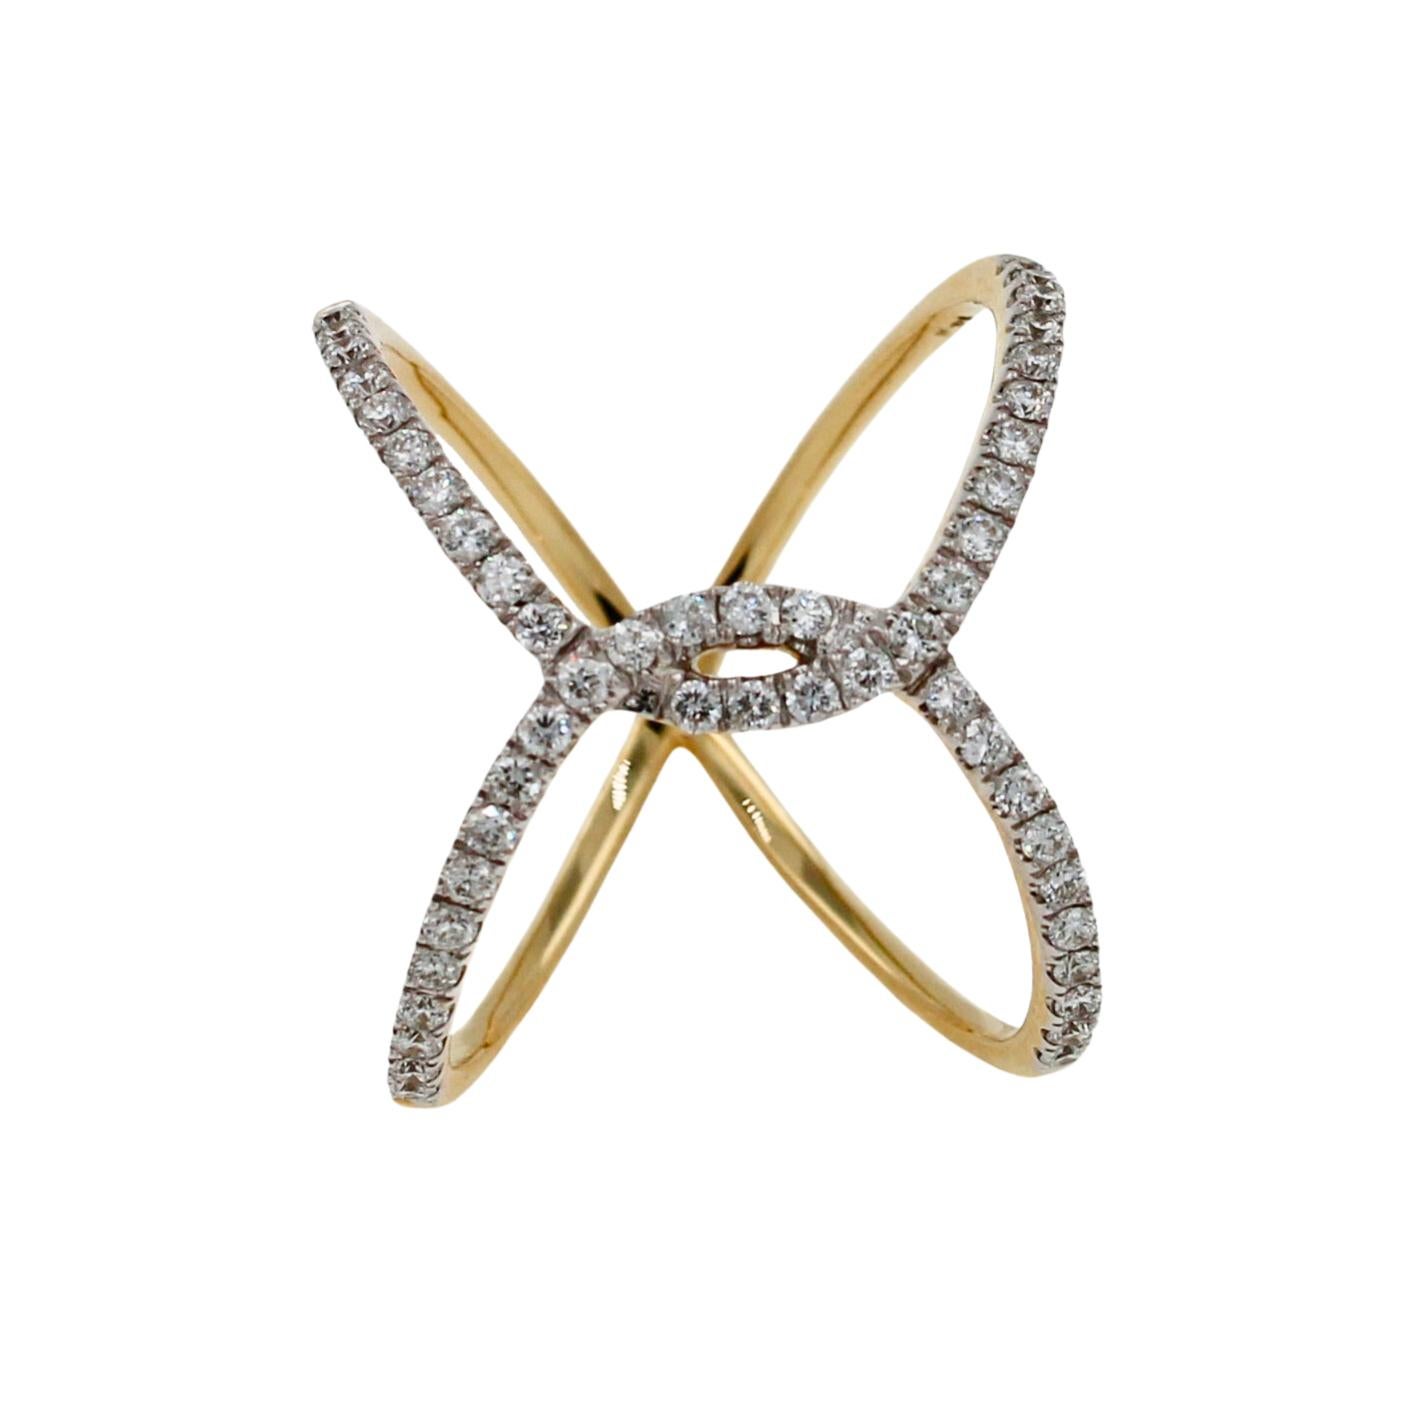 Diamond Criss Cross Pave Cocktail Fashion Open Spiral 18 Karat Yellow Gold Ring
0.65 Carats of Pave GH/VS Diamonds
Very Brilliant & Sparkly Diamonds
14K Yellow Gold
Great Value
Size 7.75 - Resizable Upon Request